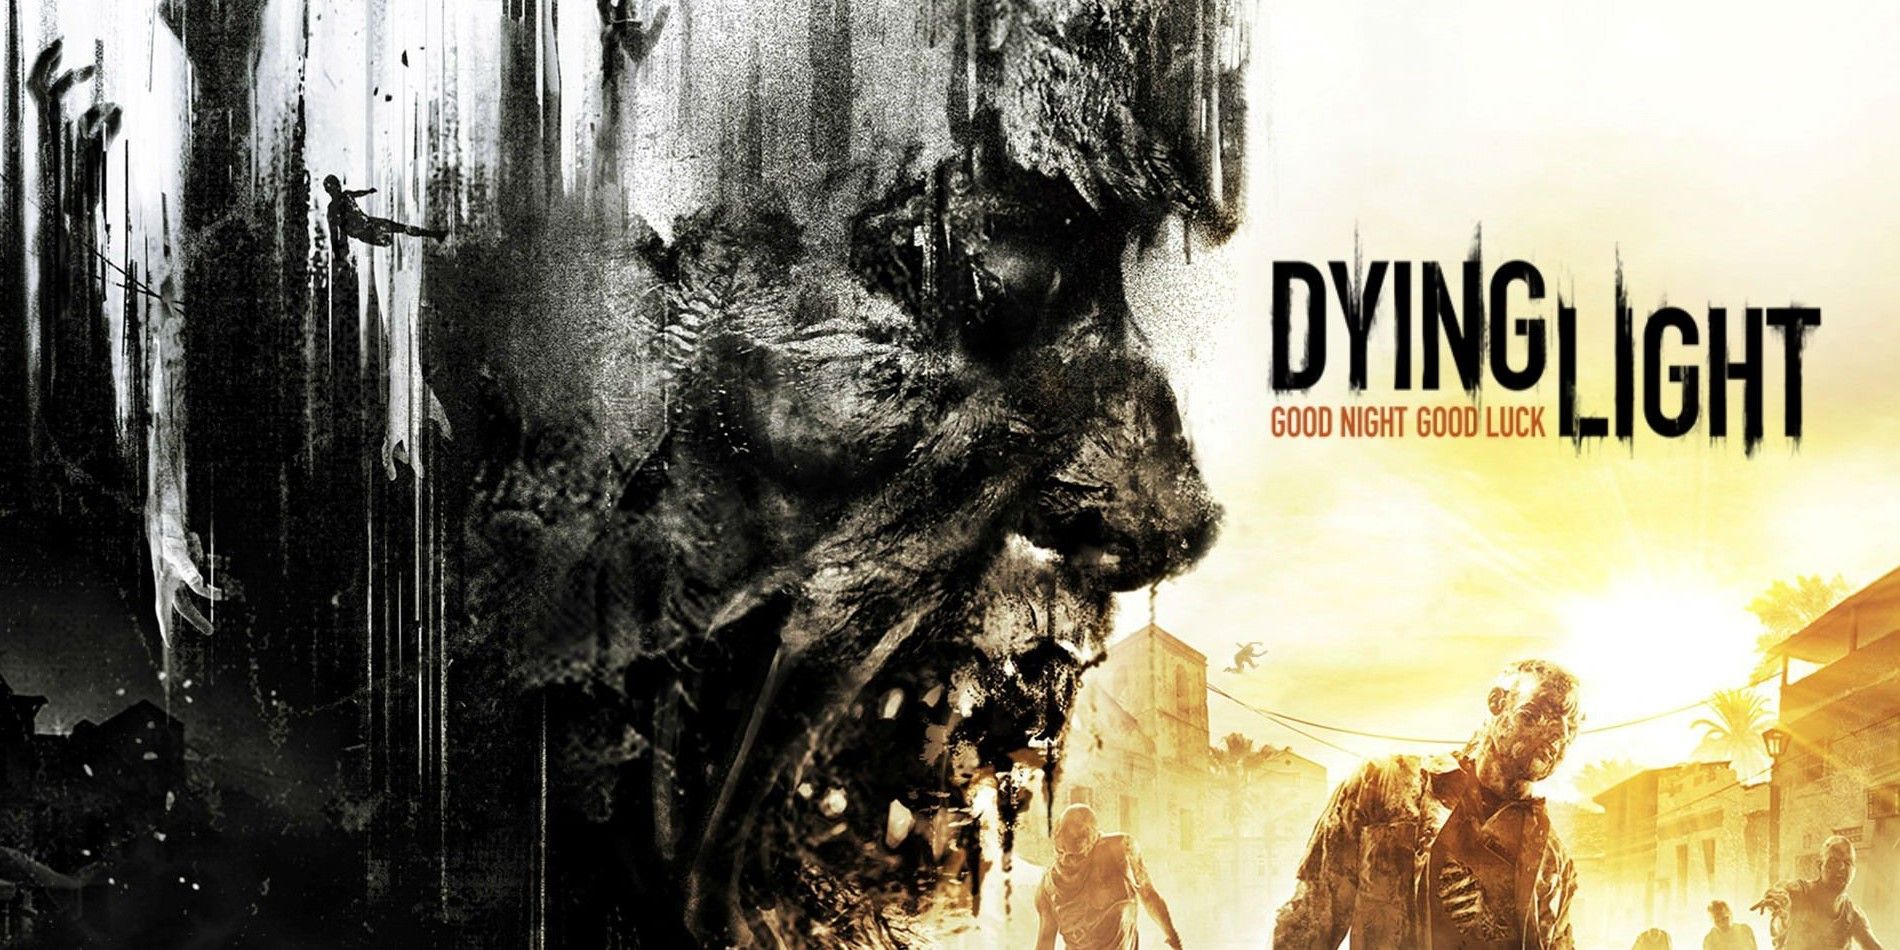 Dying Light: Definitive Edition Contains ALL 26 DLC Packs